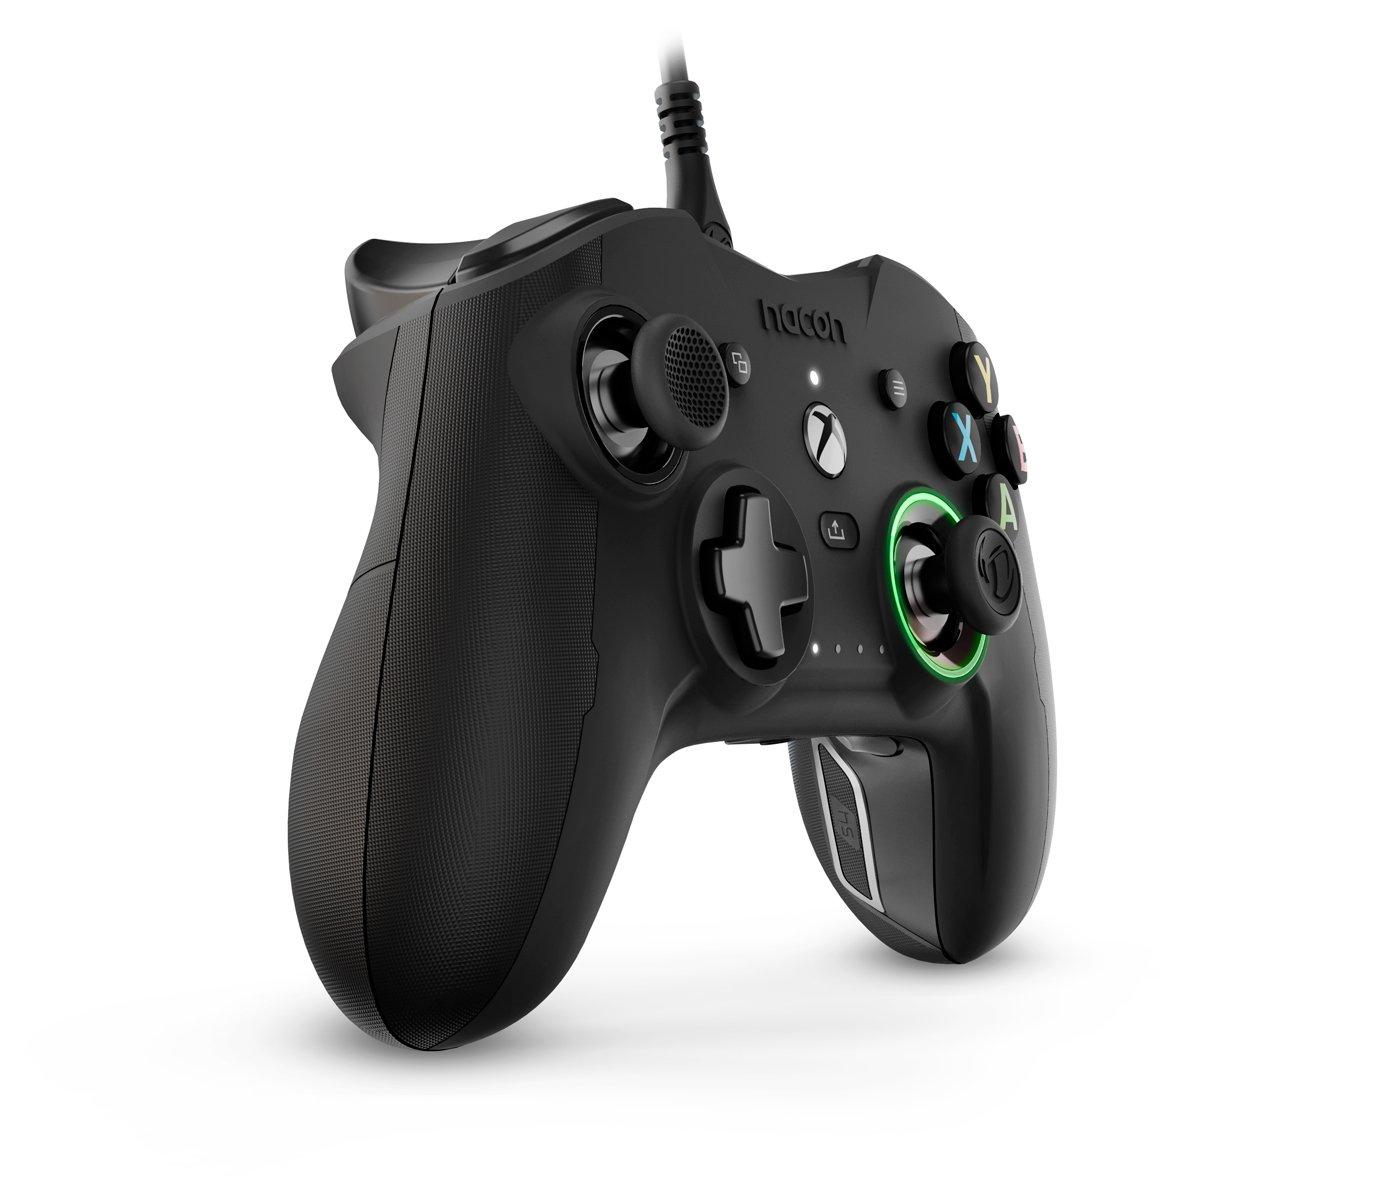 RIG Revolution X Wired Controller for Xbox